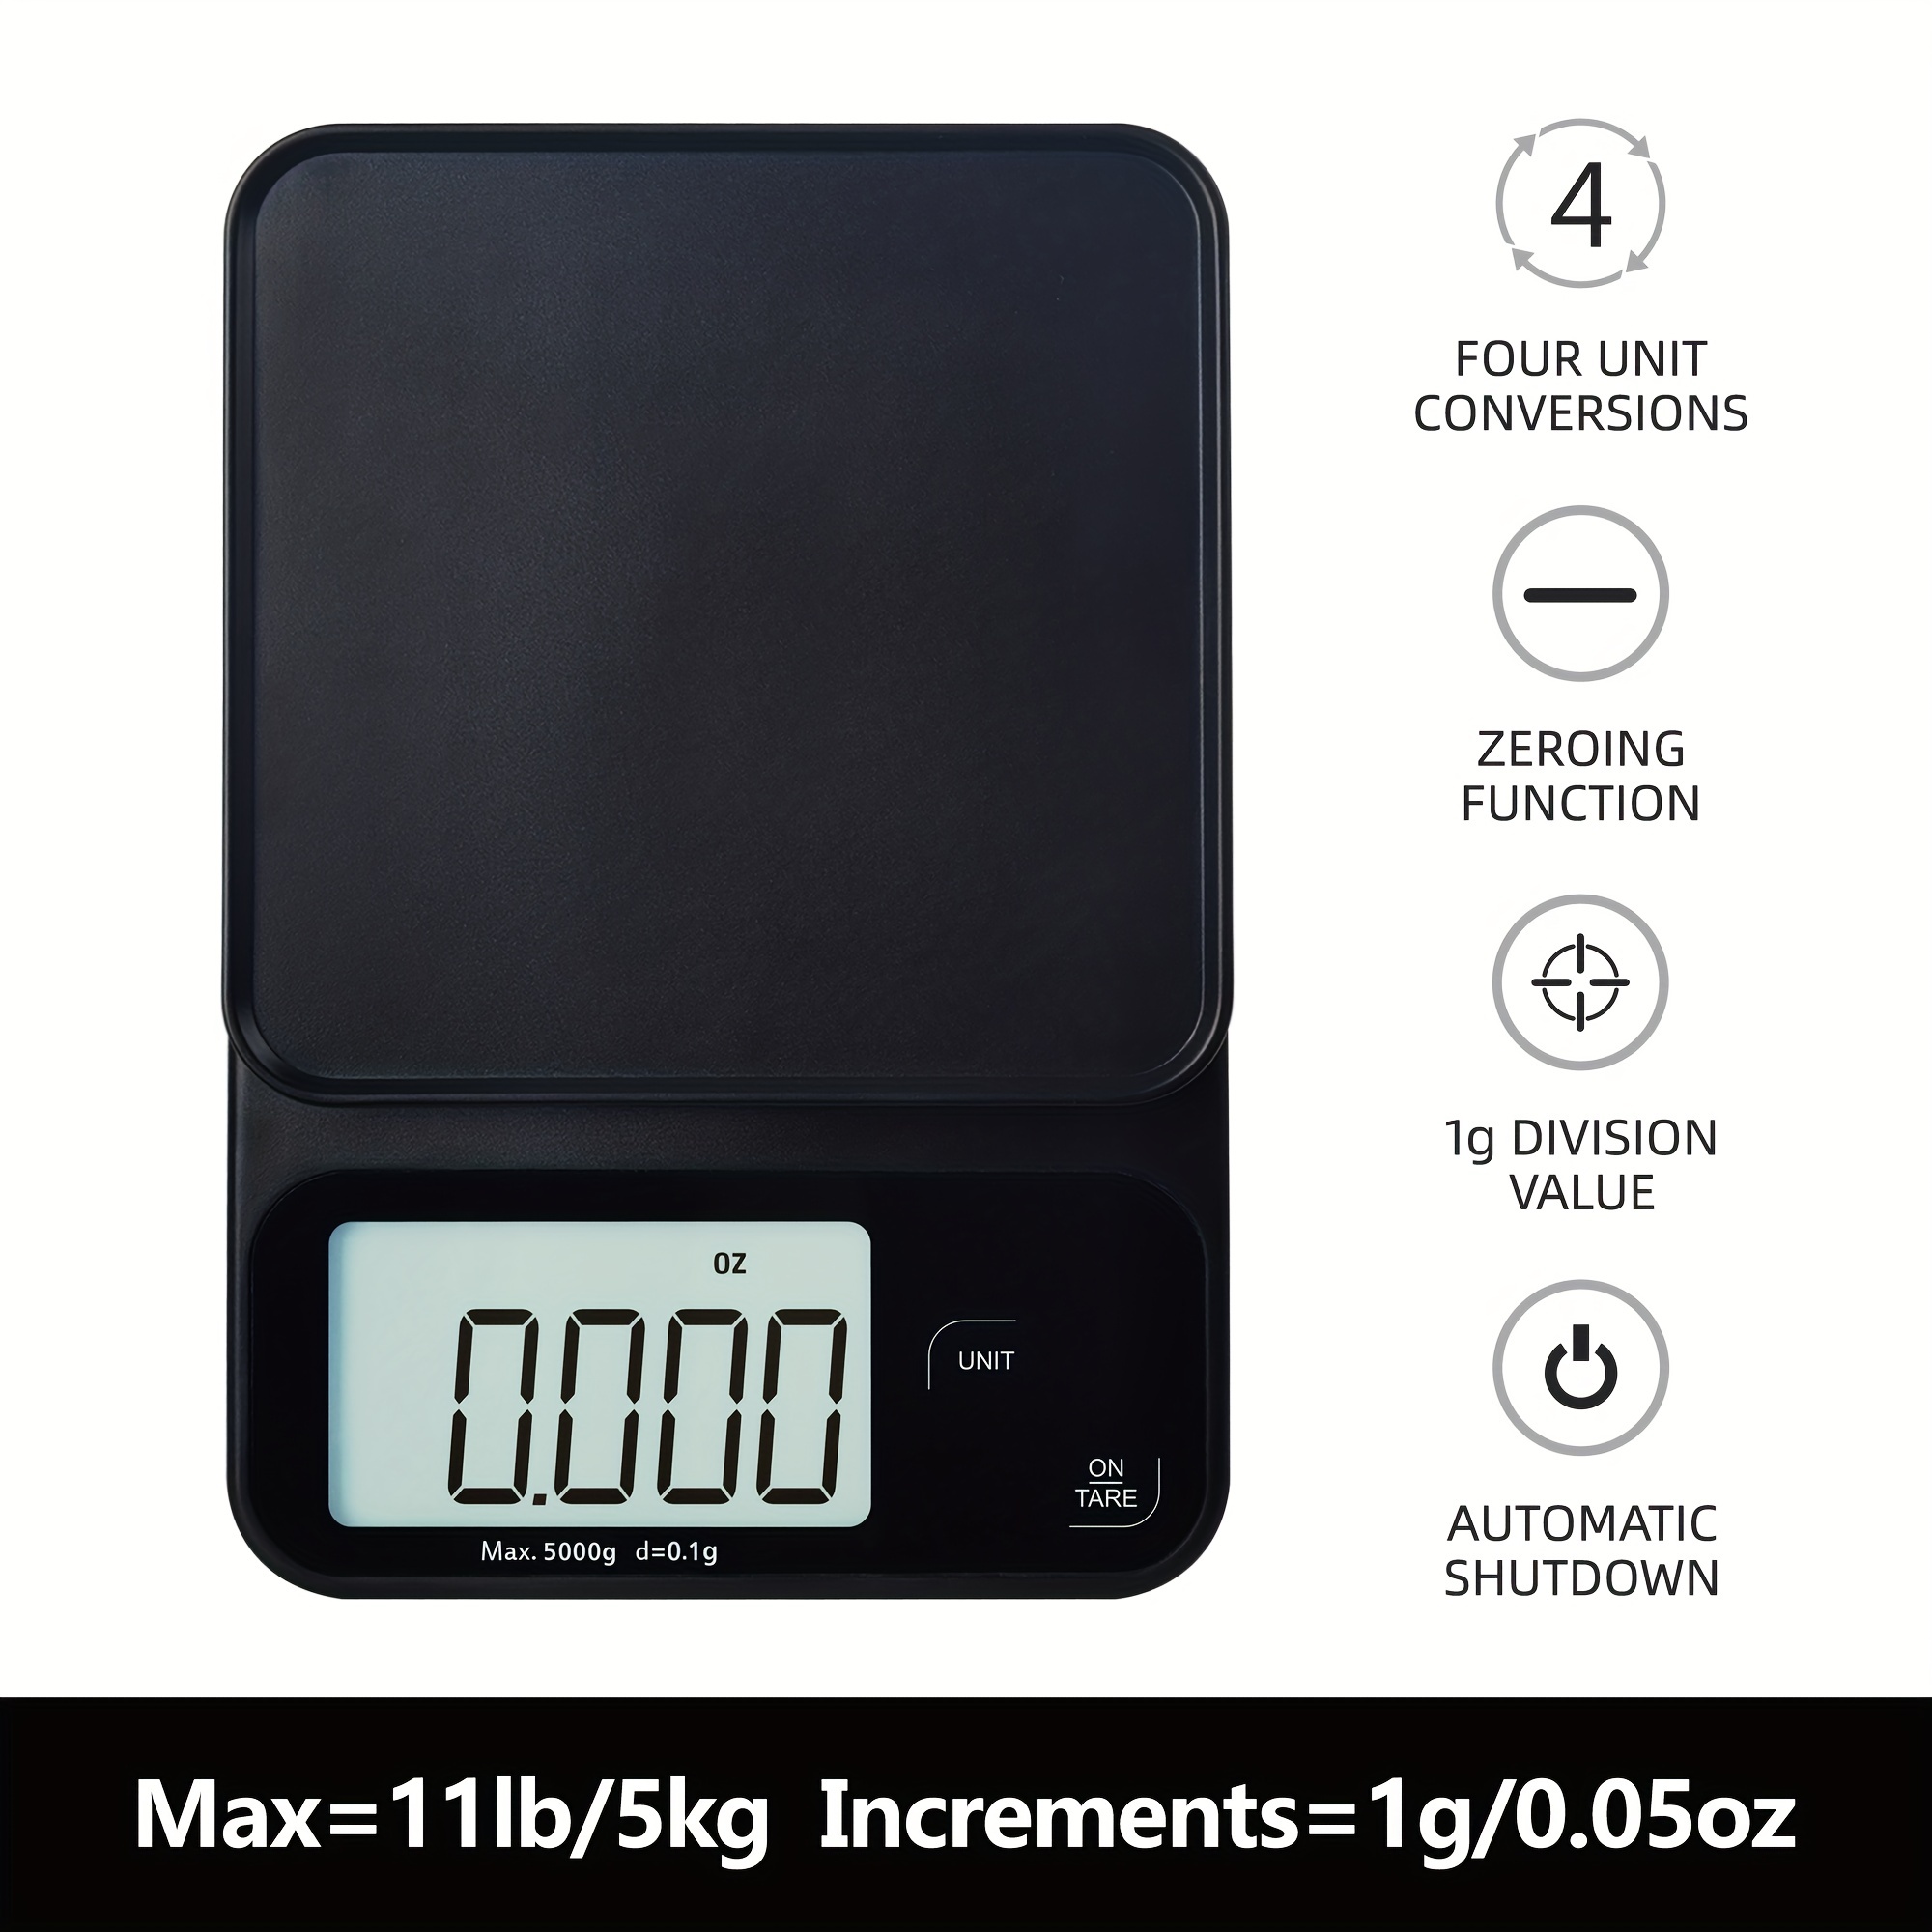 Greater Goods Gray Food Scale - Digital Display Shows Weight in Grams,  Ounces, Milliliters, and Pounds | Perfect for Meal Prep, Cooking, and  Baking 